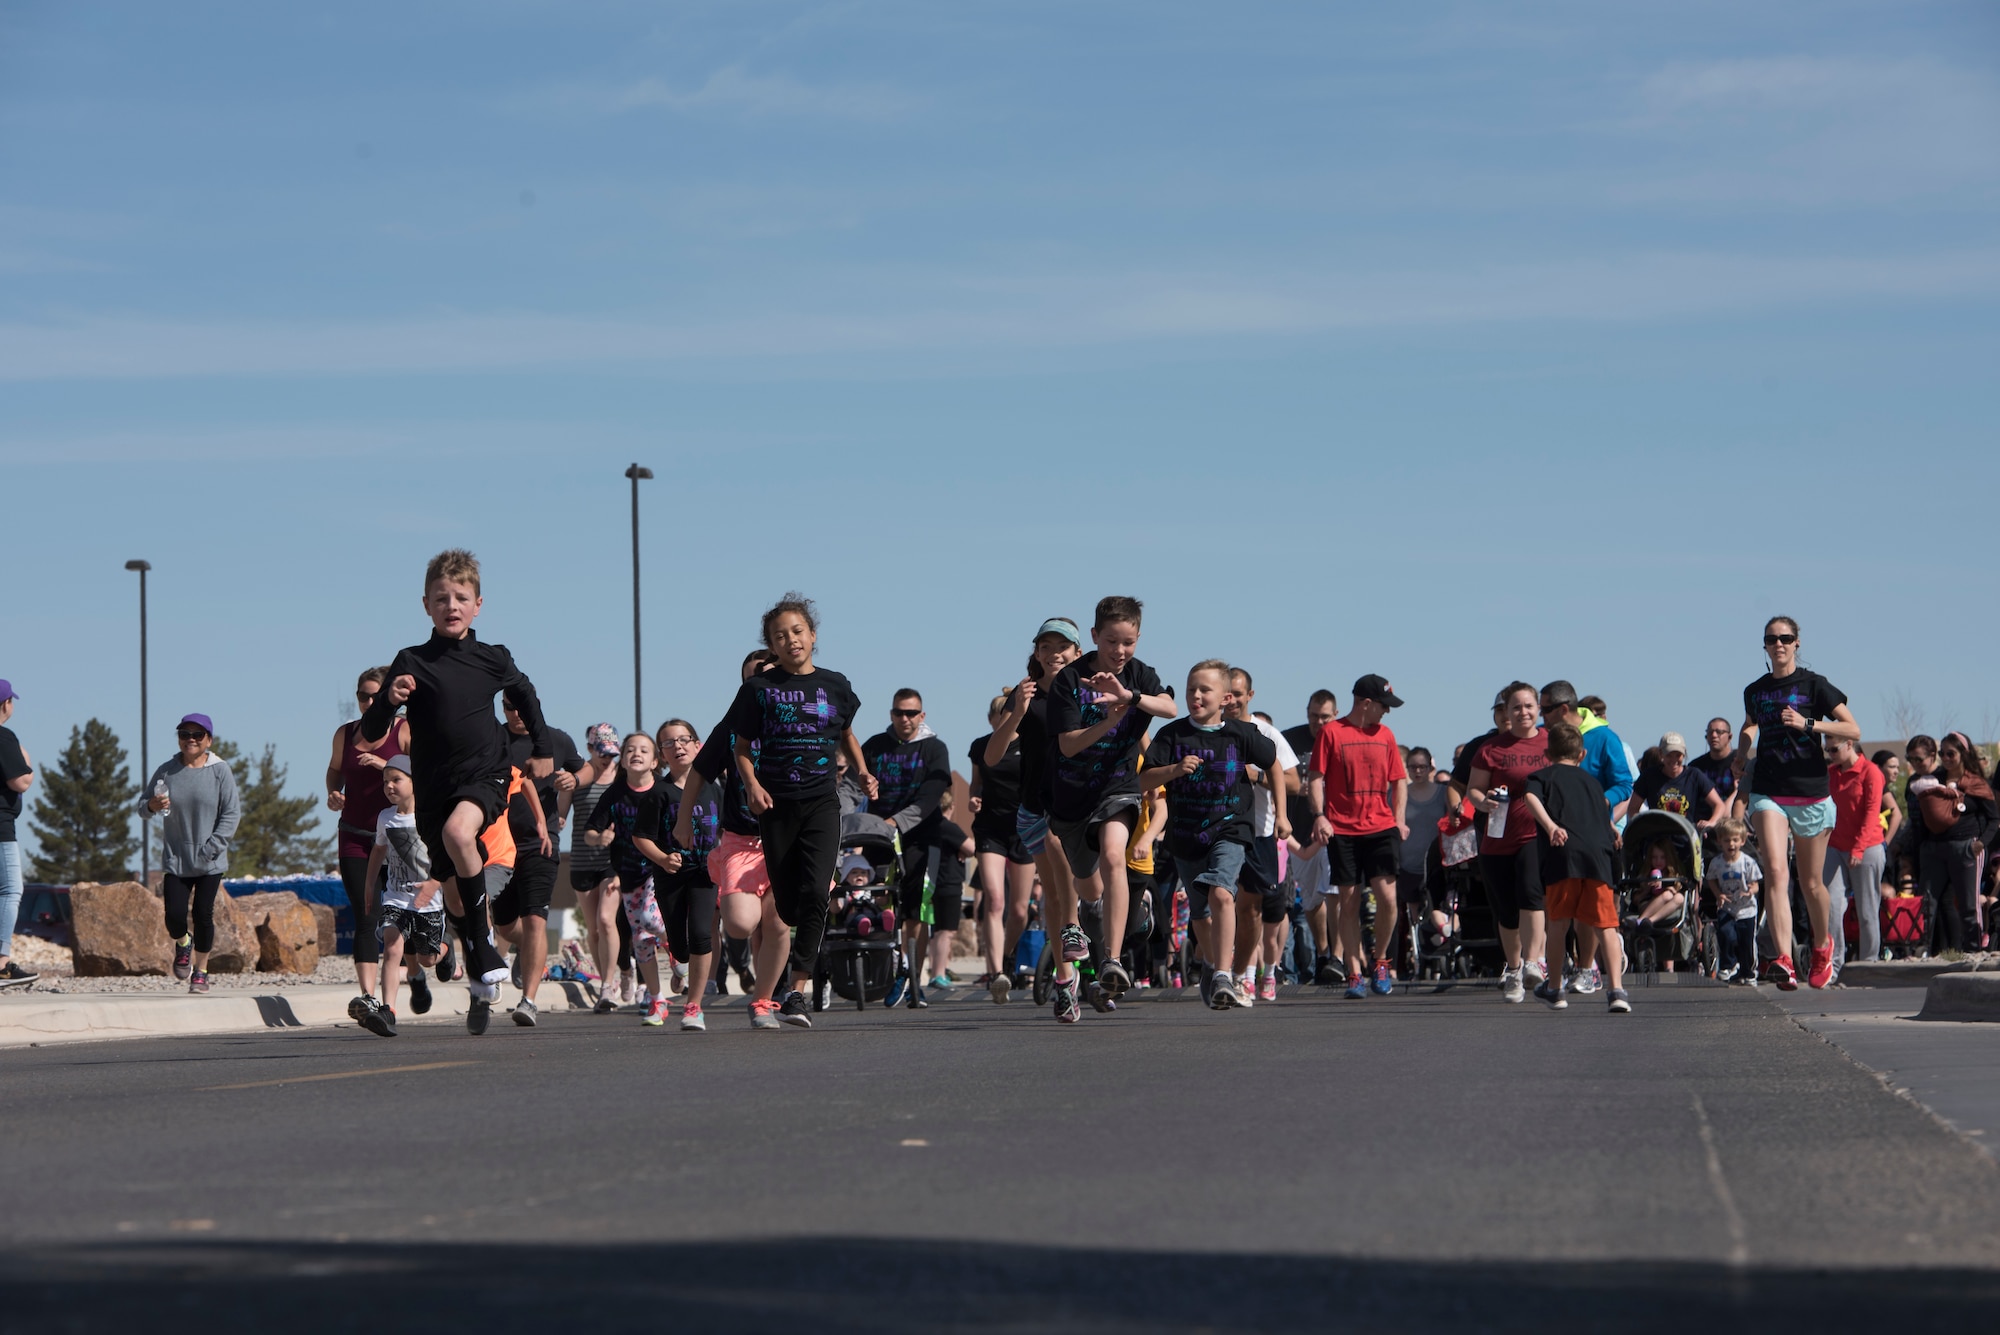 Participates take off from the starting line of an Autism Awareness fun run on Holloman Air Force Base, April 6, 2019. Over 750 people participated in the fun run and children’s carnival. (U.S. Air Force Photo by Staff Sgt. Timothy Young)